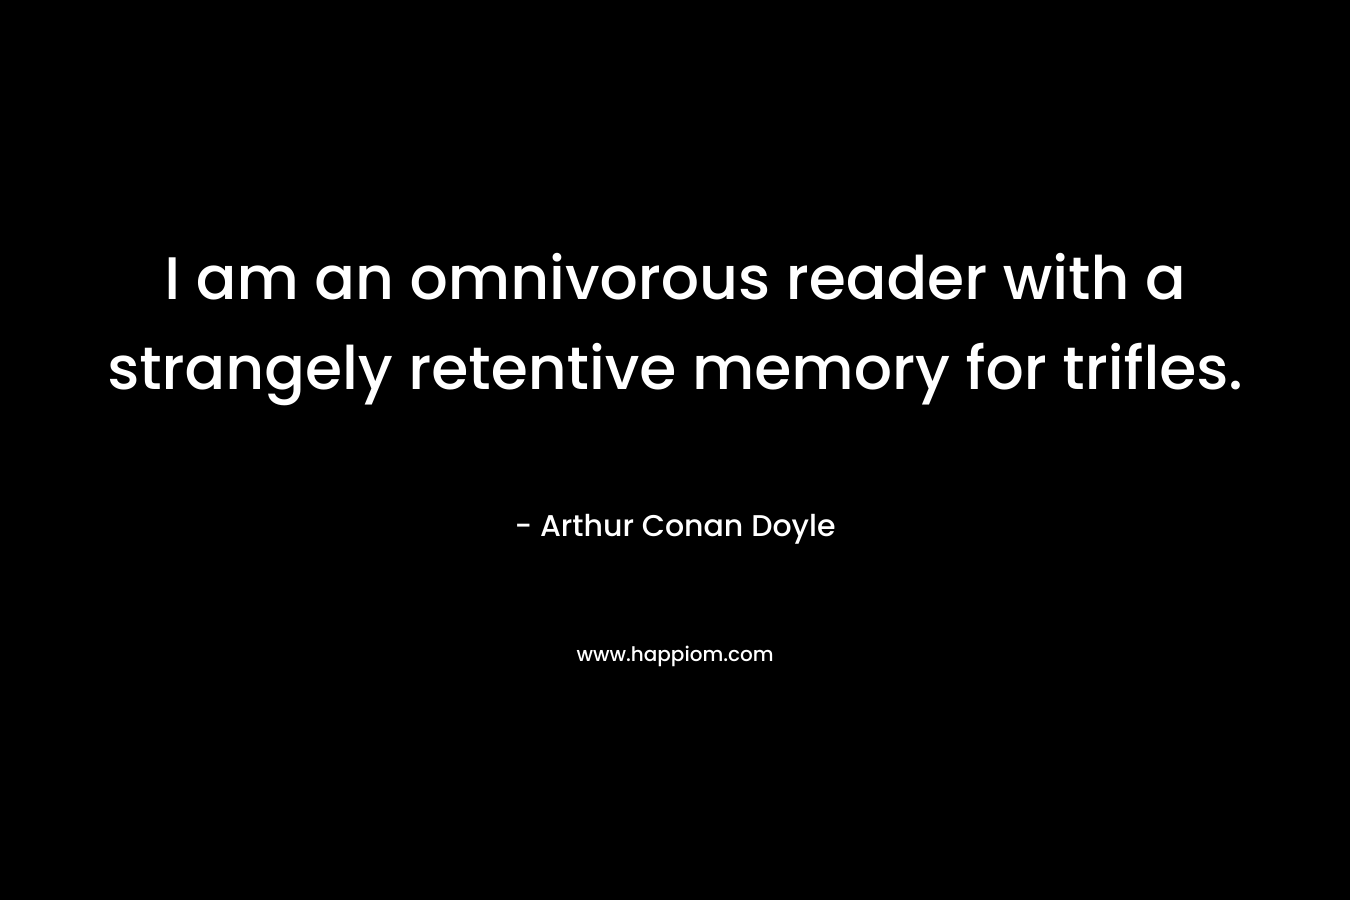 I am an omnivorous reader with a strangely retentive memory for trifles.